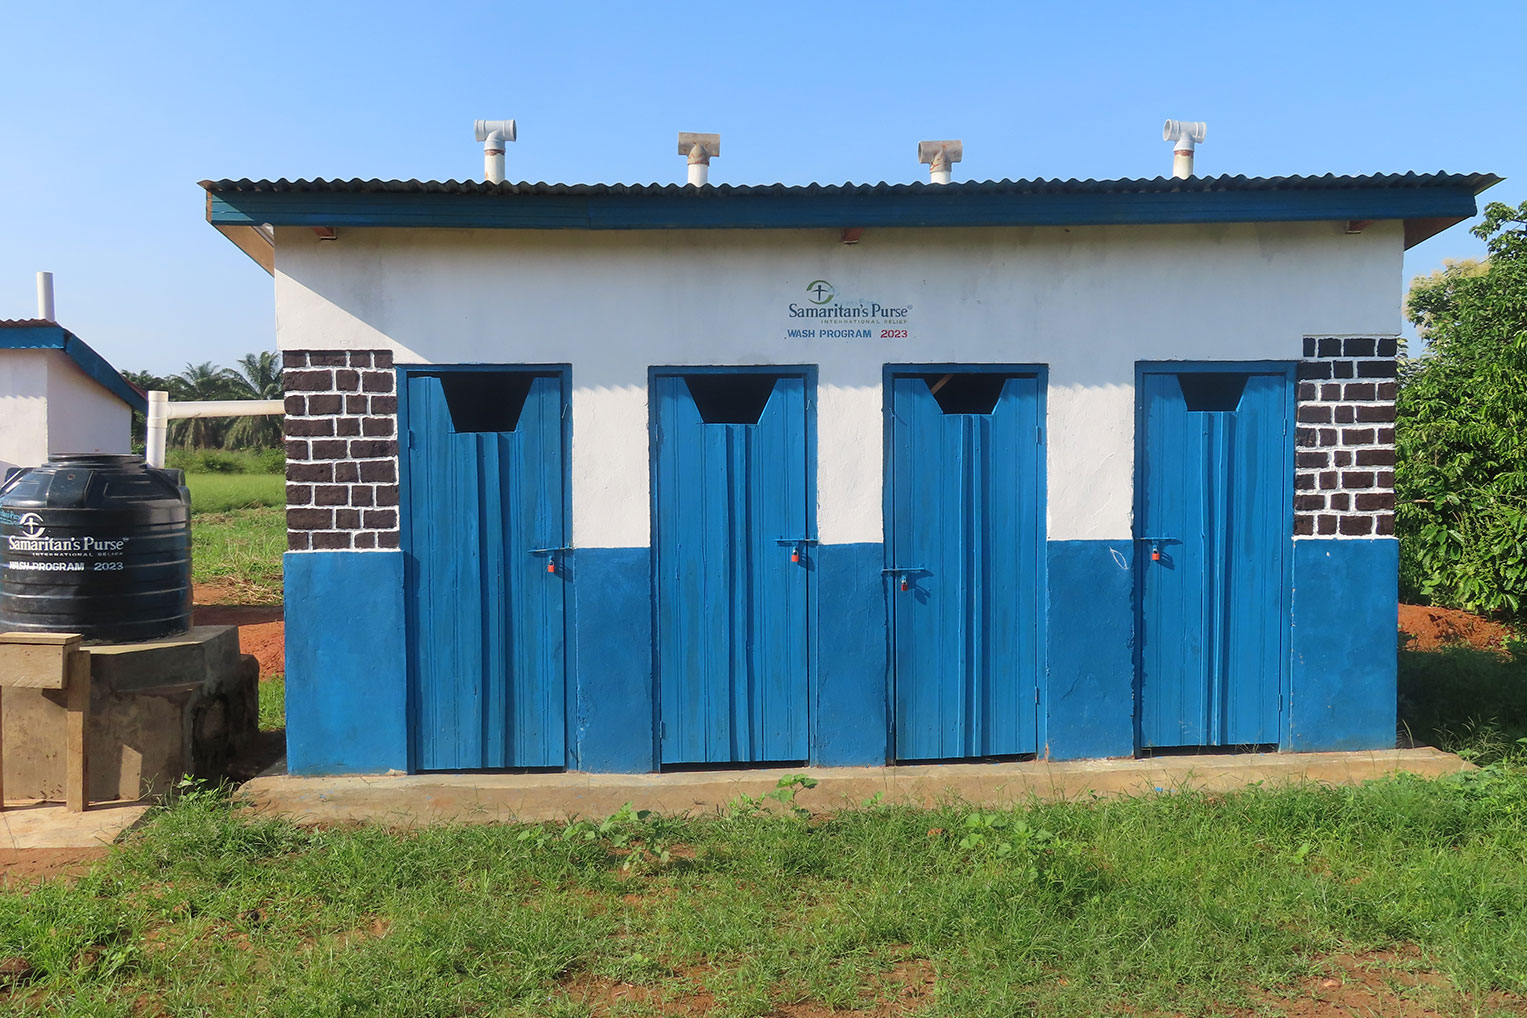 A latrine and hand washing station for the village school will be integral in protecting against waterborne illnesses.